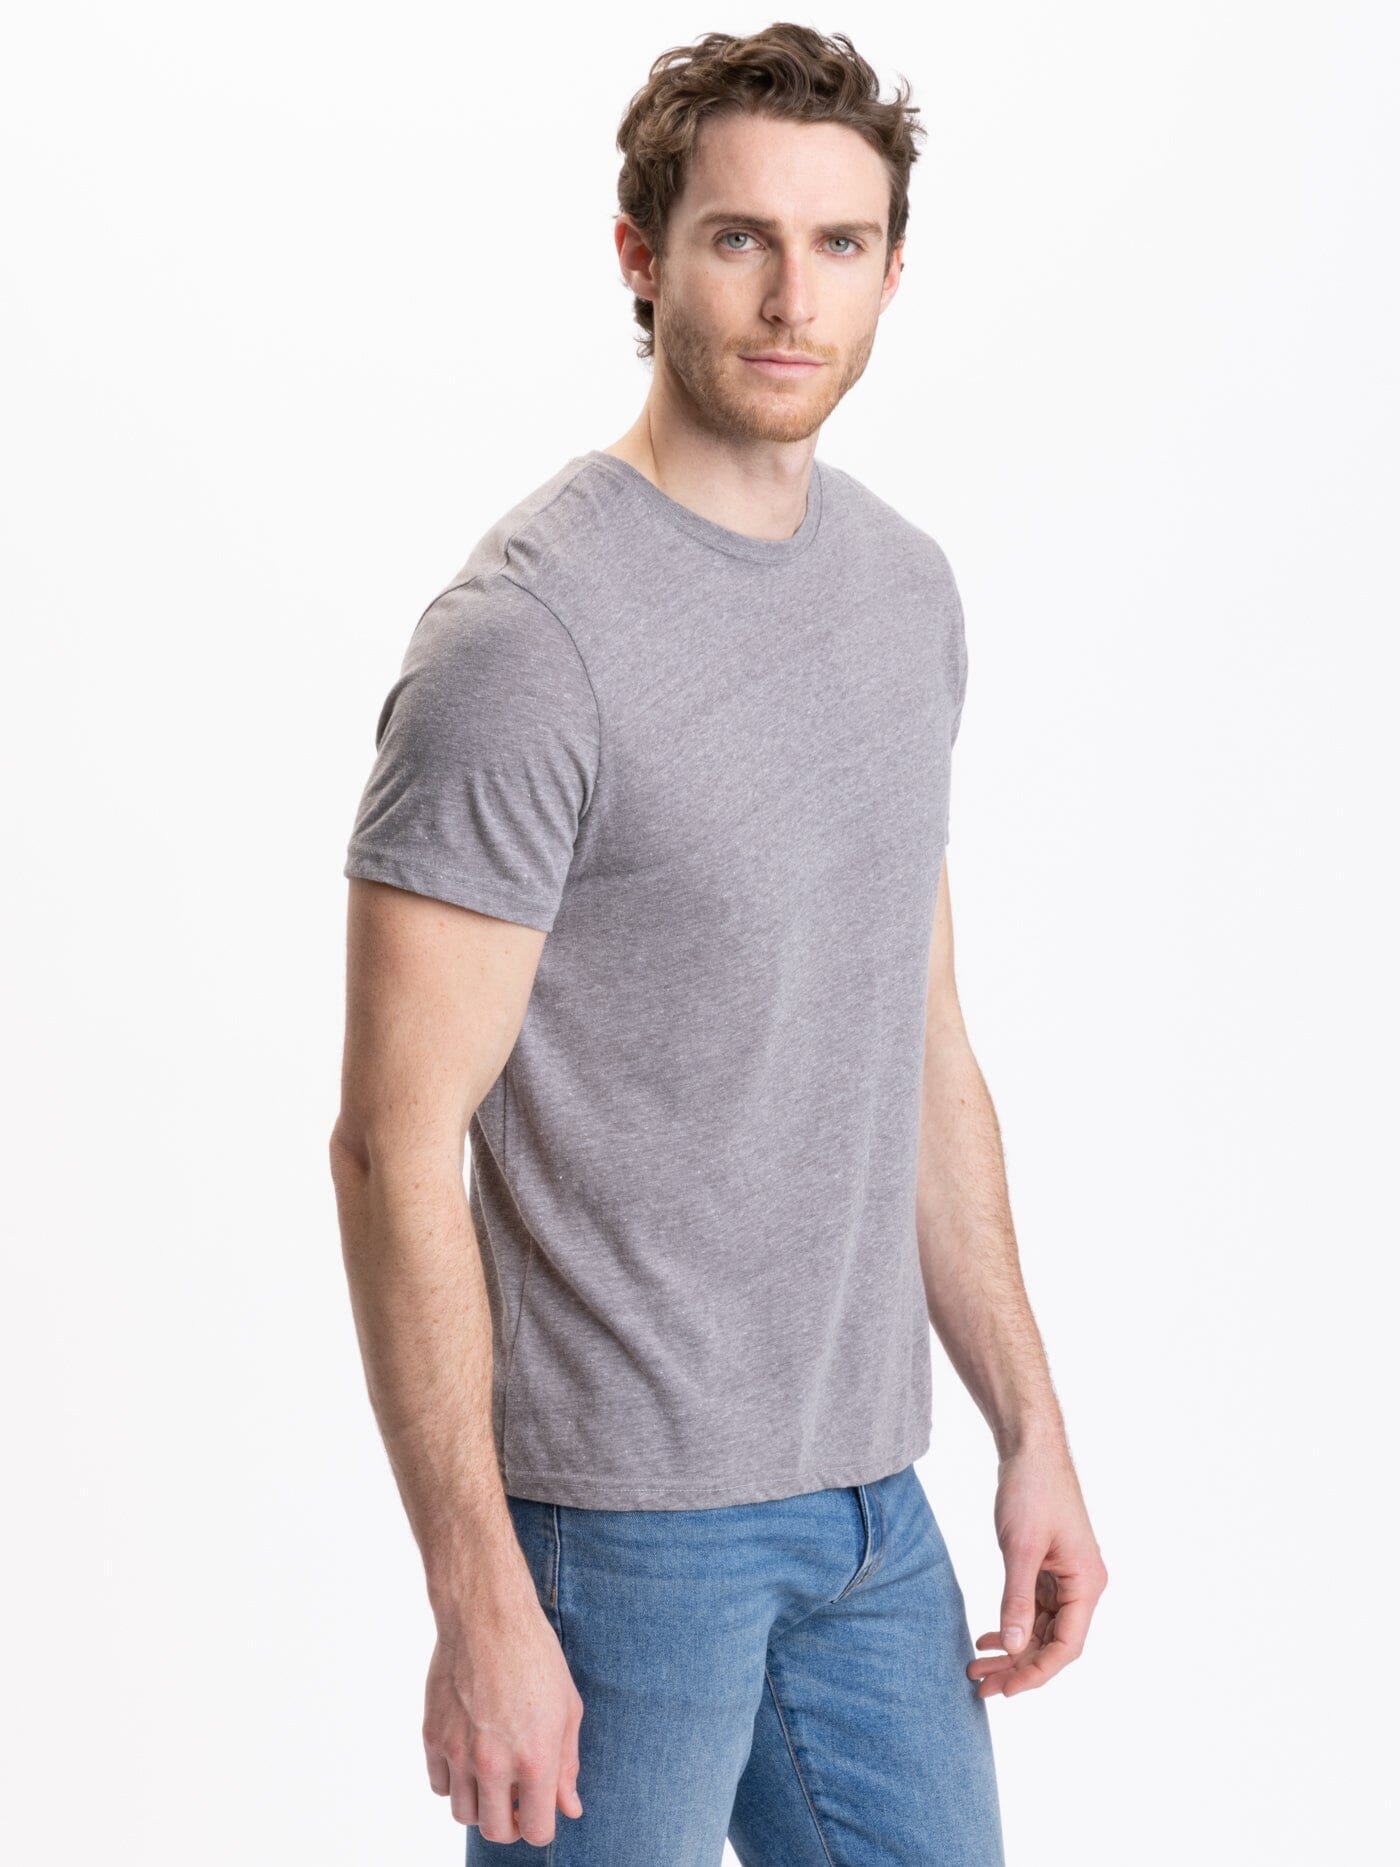 Men's Clothing – Threads 4 Thought